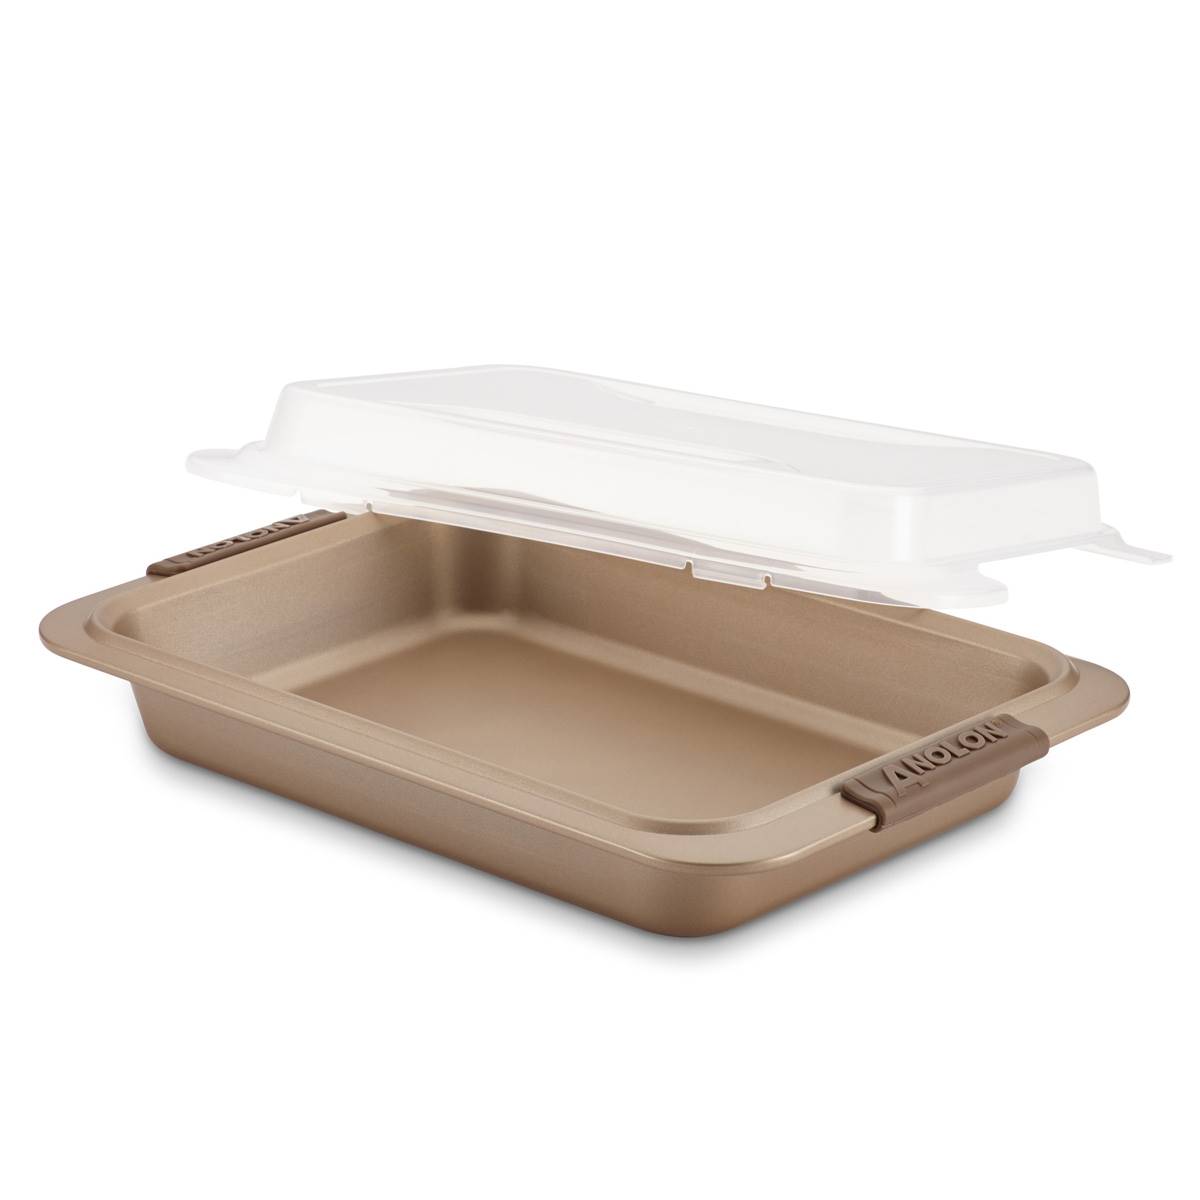 Anolon(R) Advanced Nonstick Bakeware Cake Pan &Lid & Silicone Grip